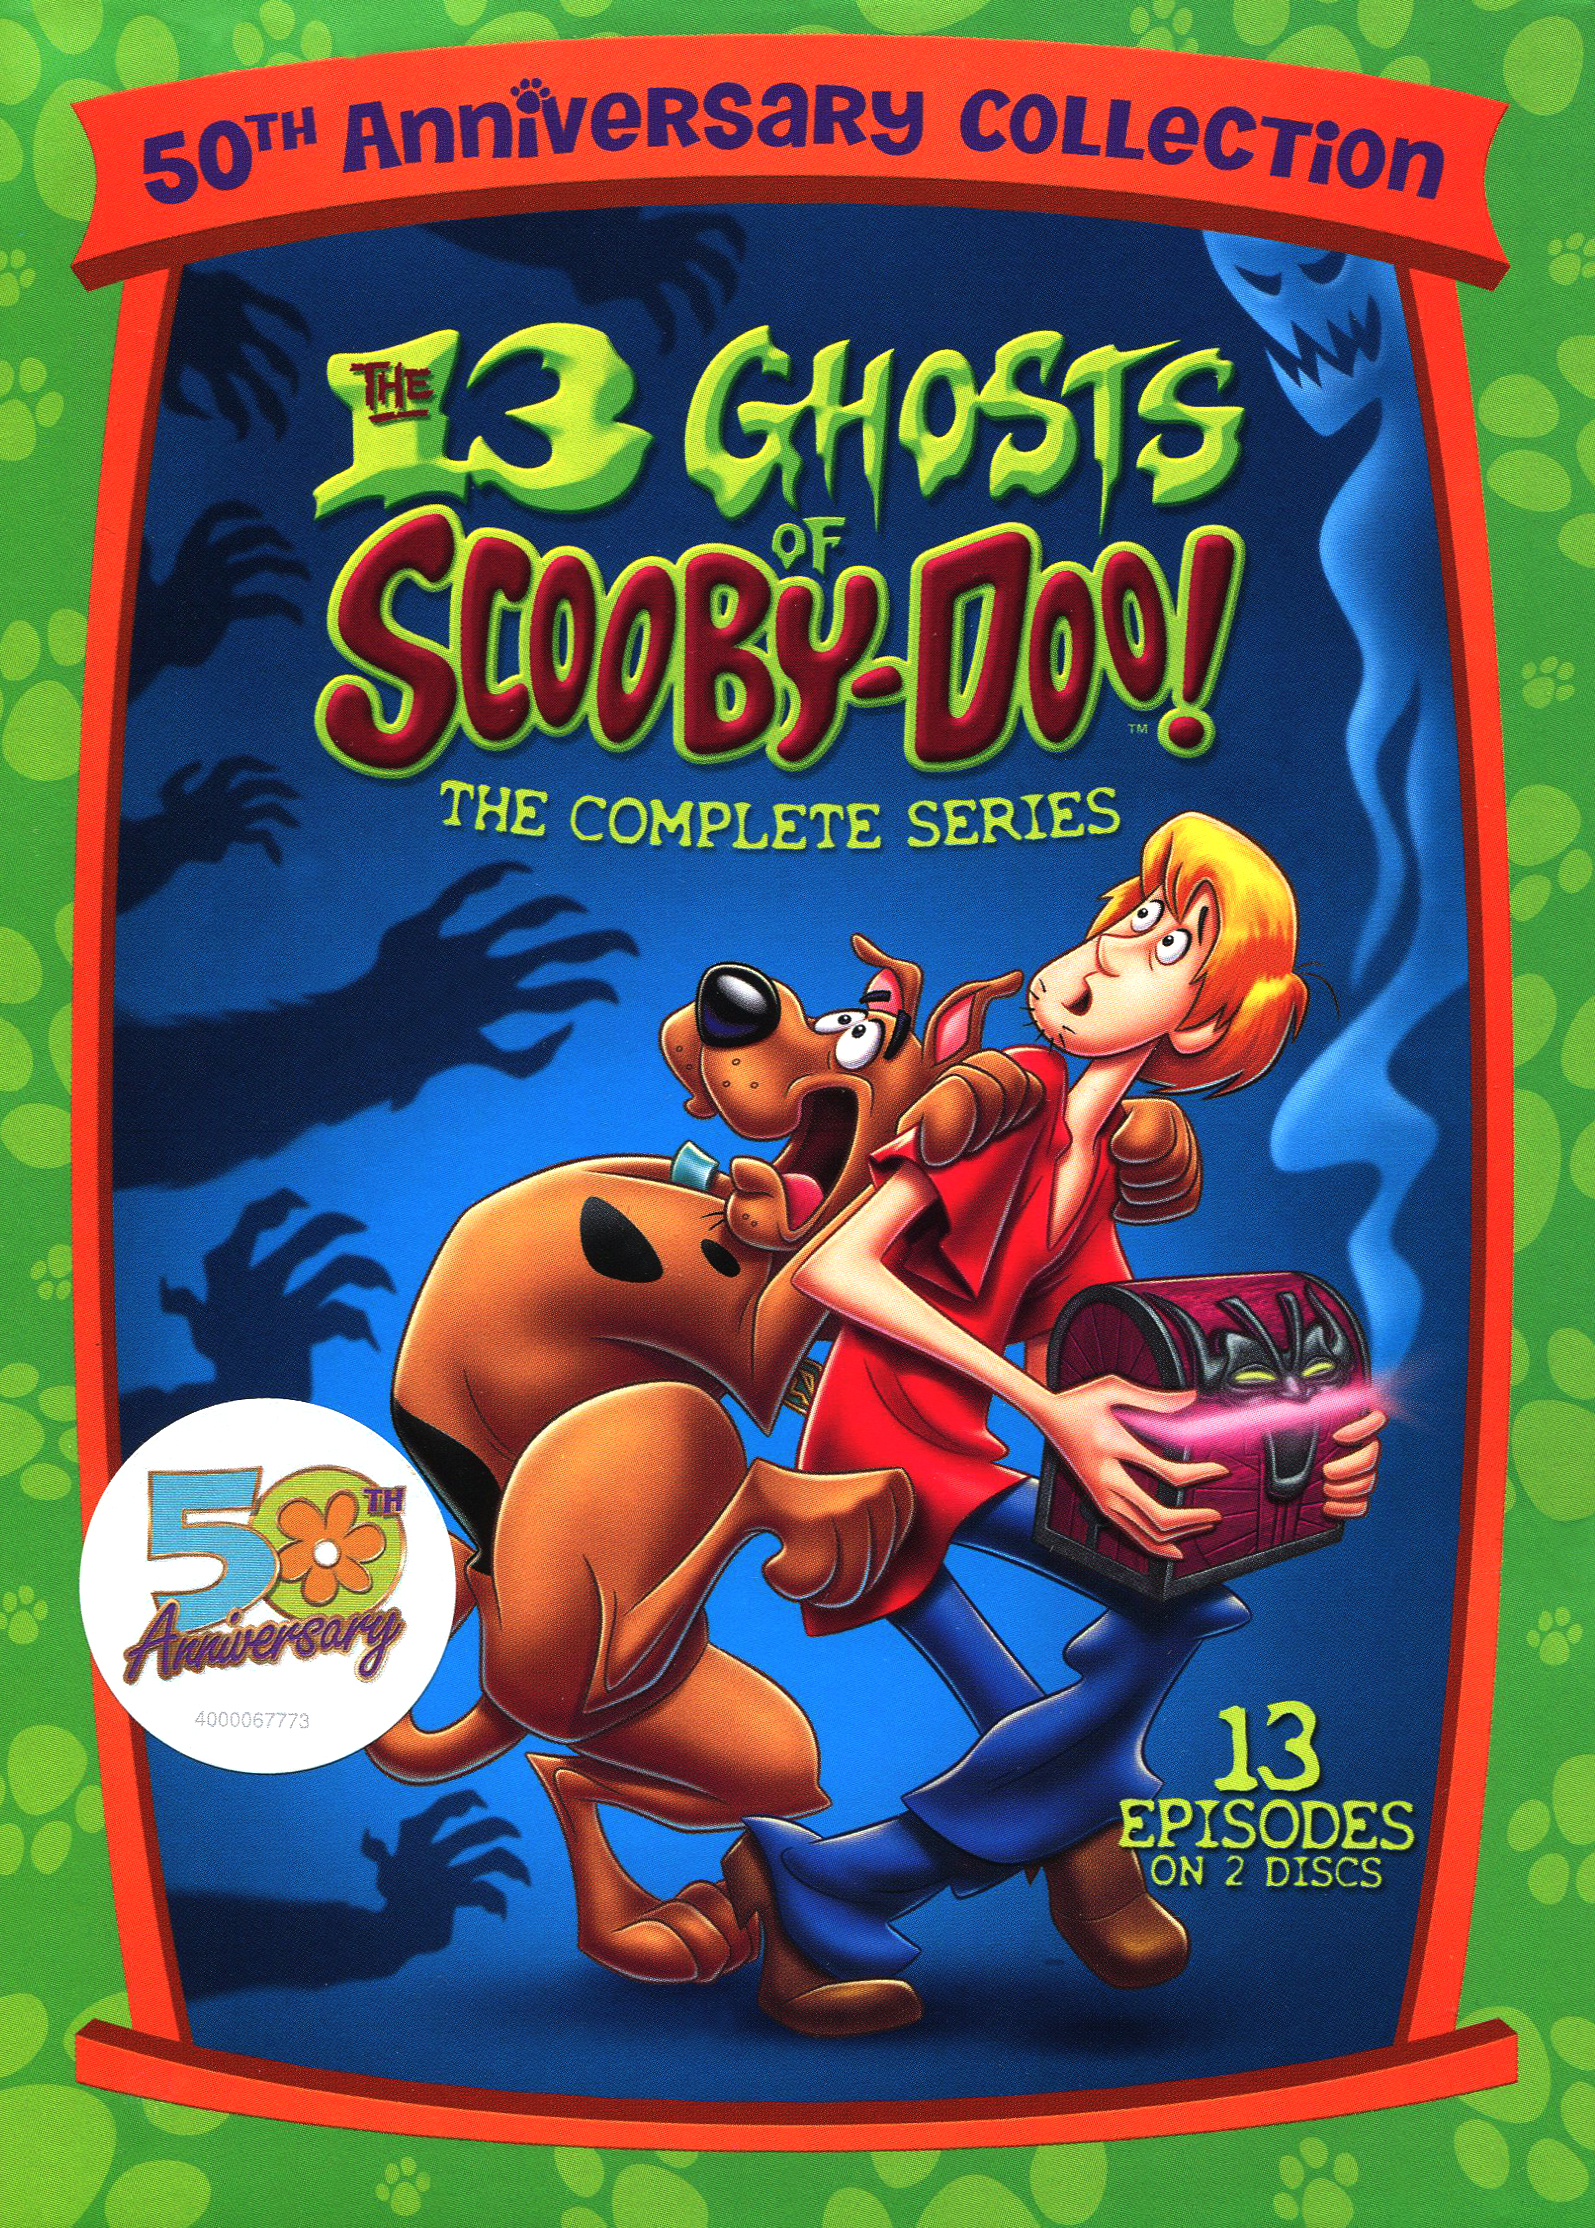 The 13 Ghosts of Scooby Doo!: The Complete Series [DVD] - Best Buy